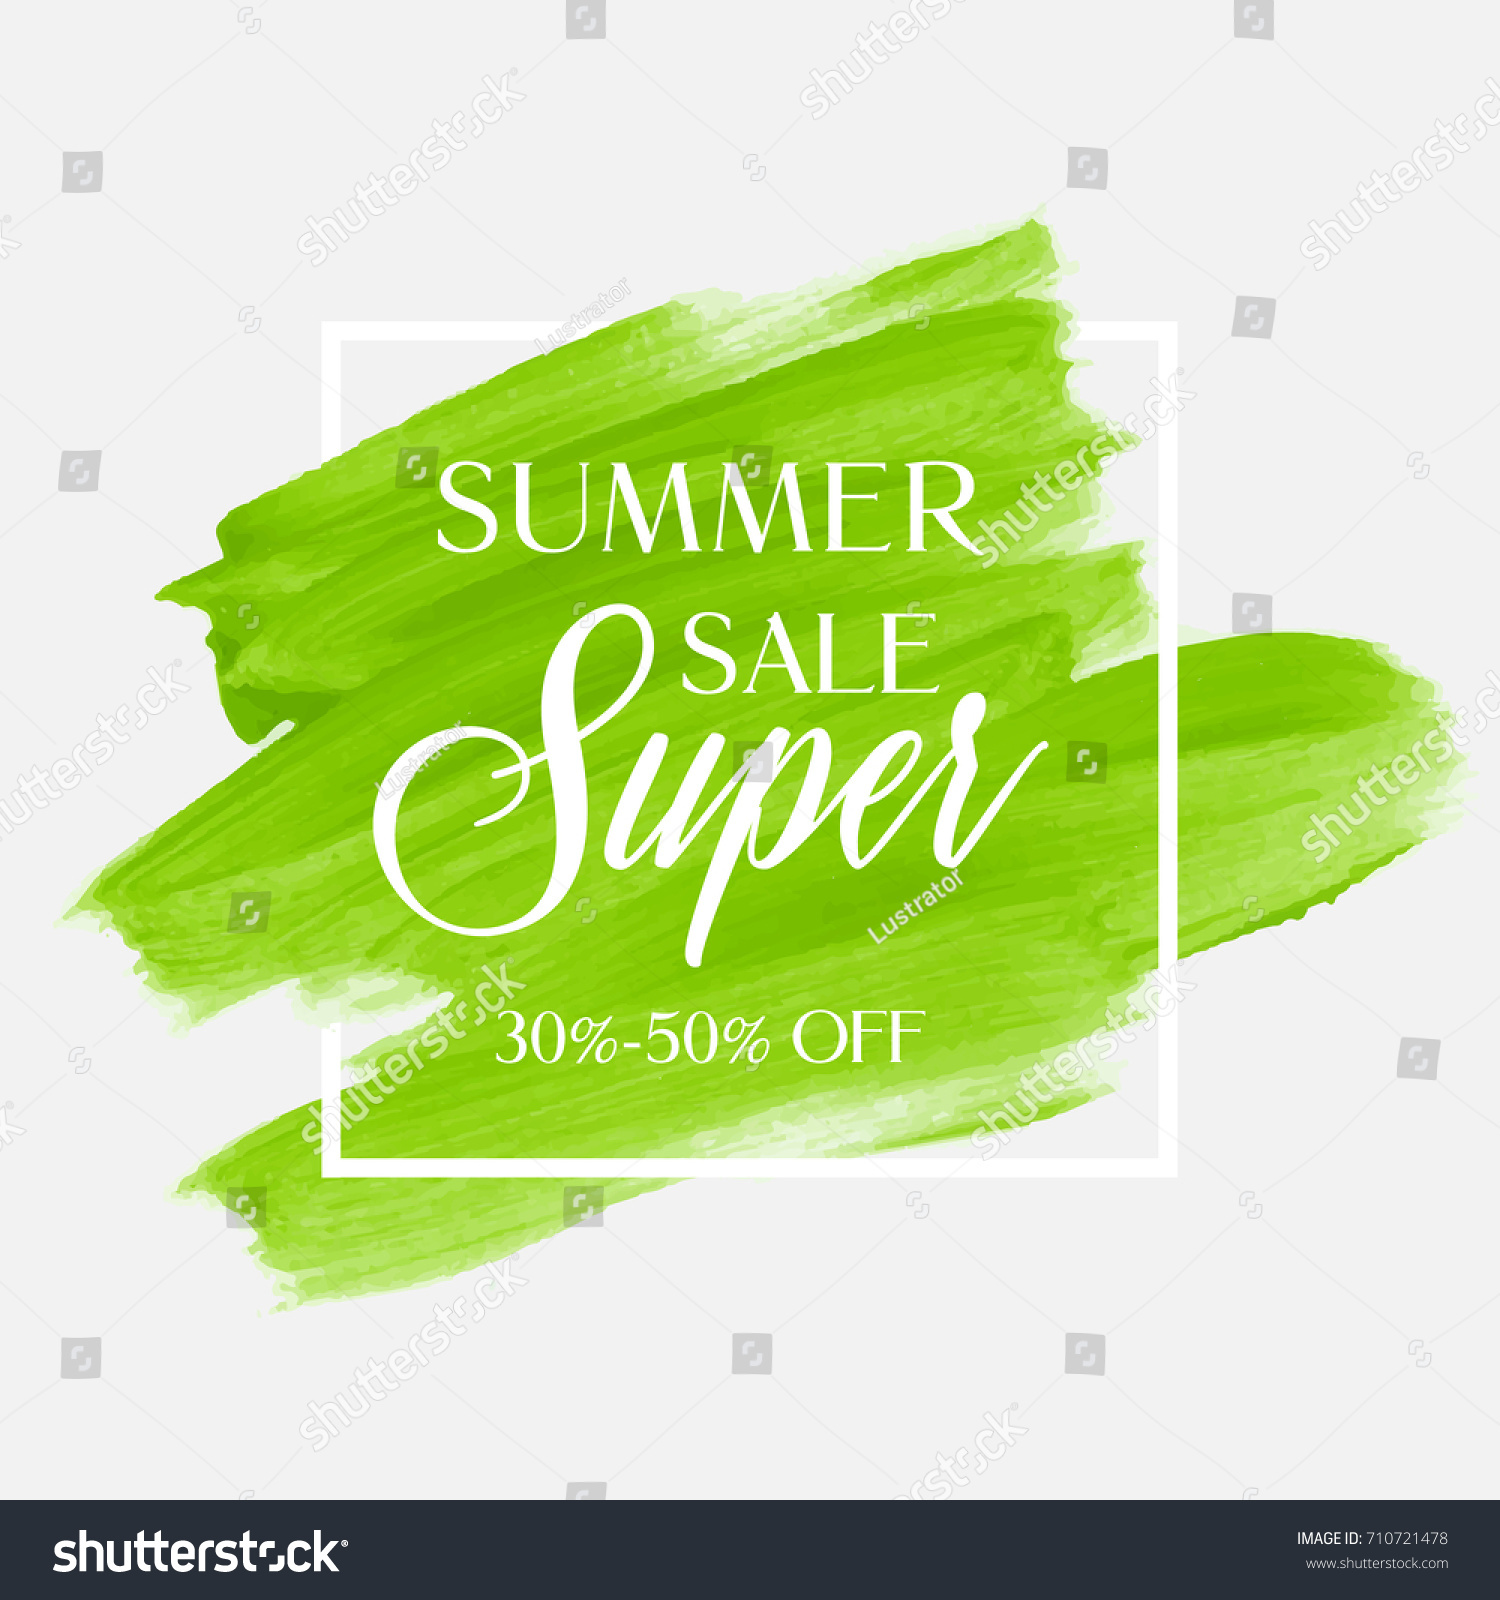 Summer Sale 30-50% off sign over watercolor art brush stroke paint abstract background vector illustration. Perfect acrylic design for a shop and sale banners. #710721478